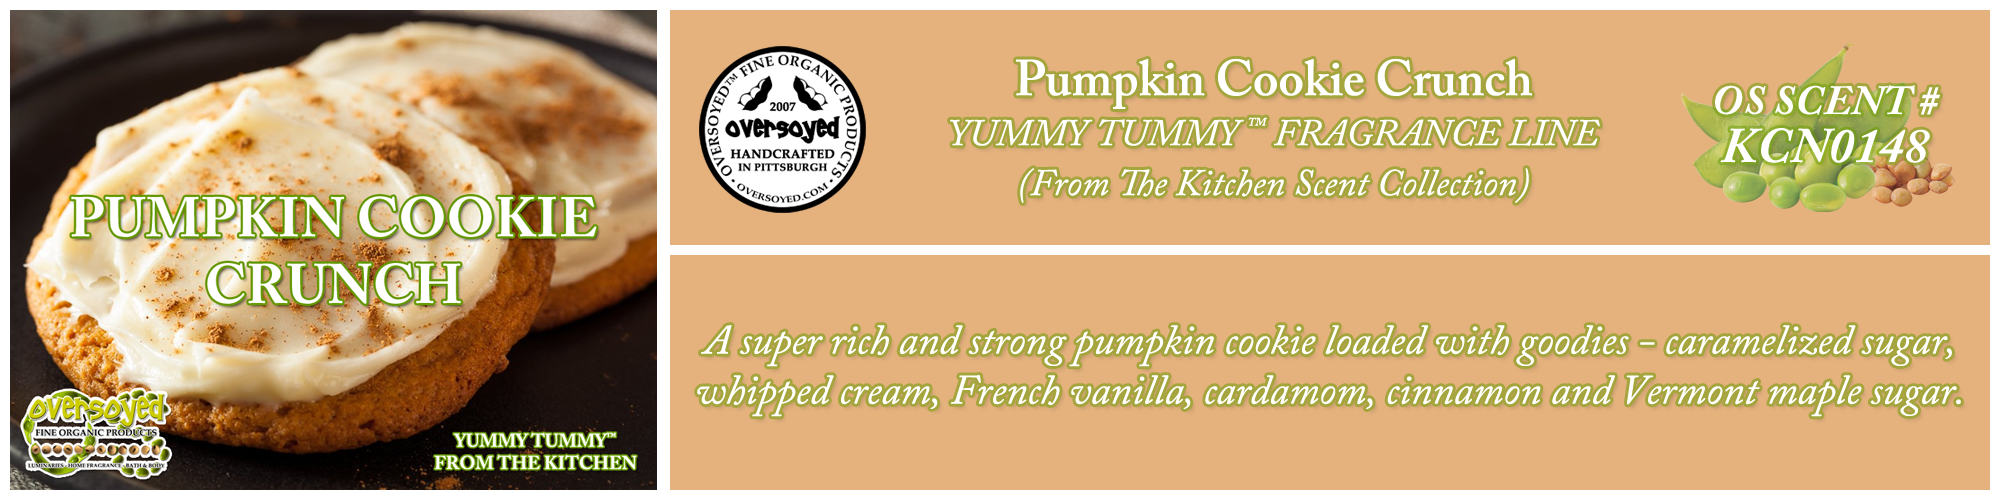 Pumpkin Cookie Crunch Handcrafted Products Collection